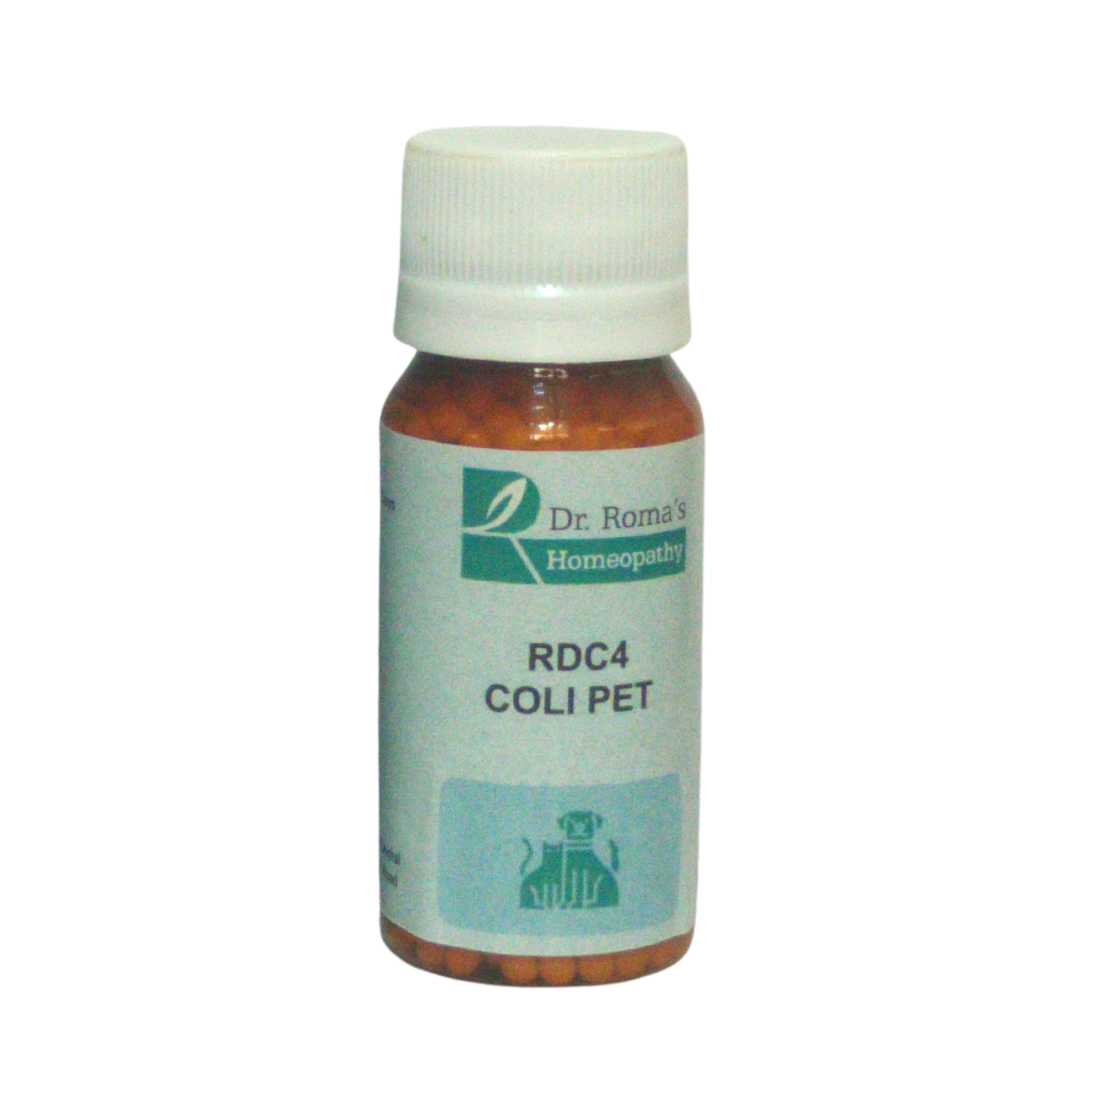 COLI PET - PAIN IN ABDOMEN due to colic, gas or indigestion - RDC 4